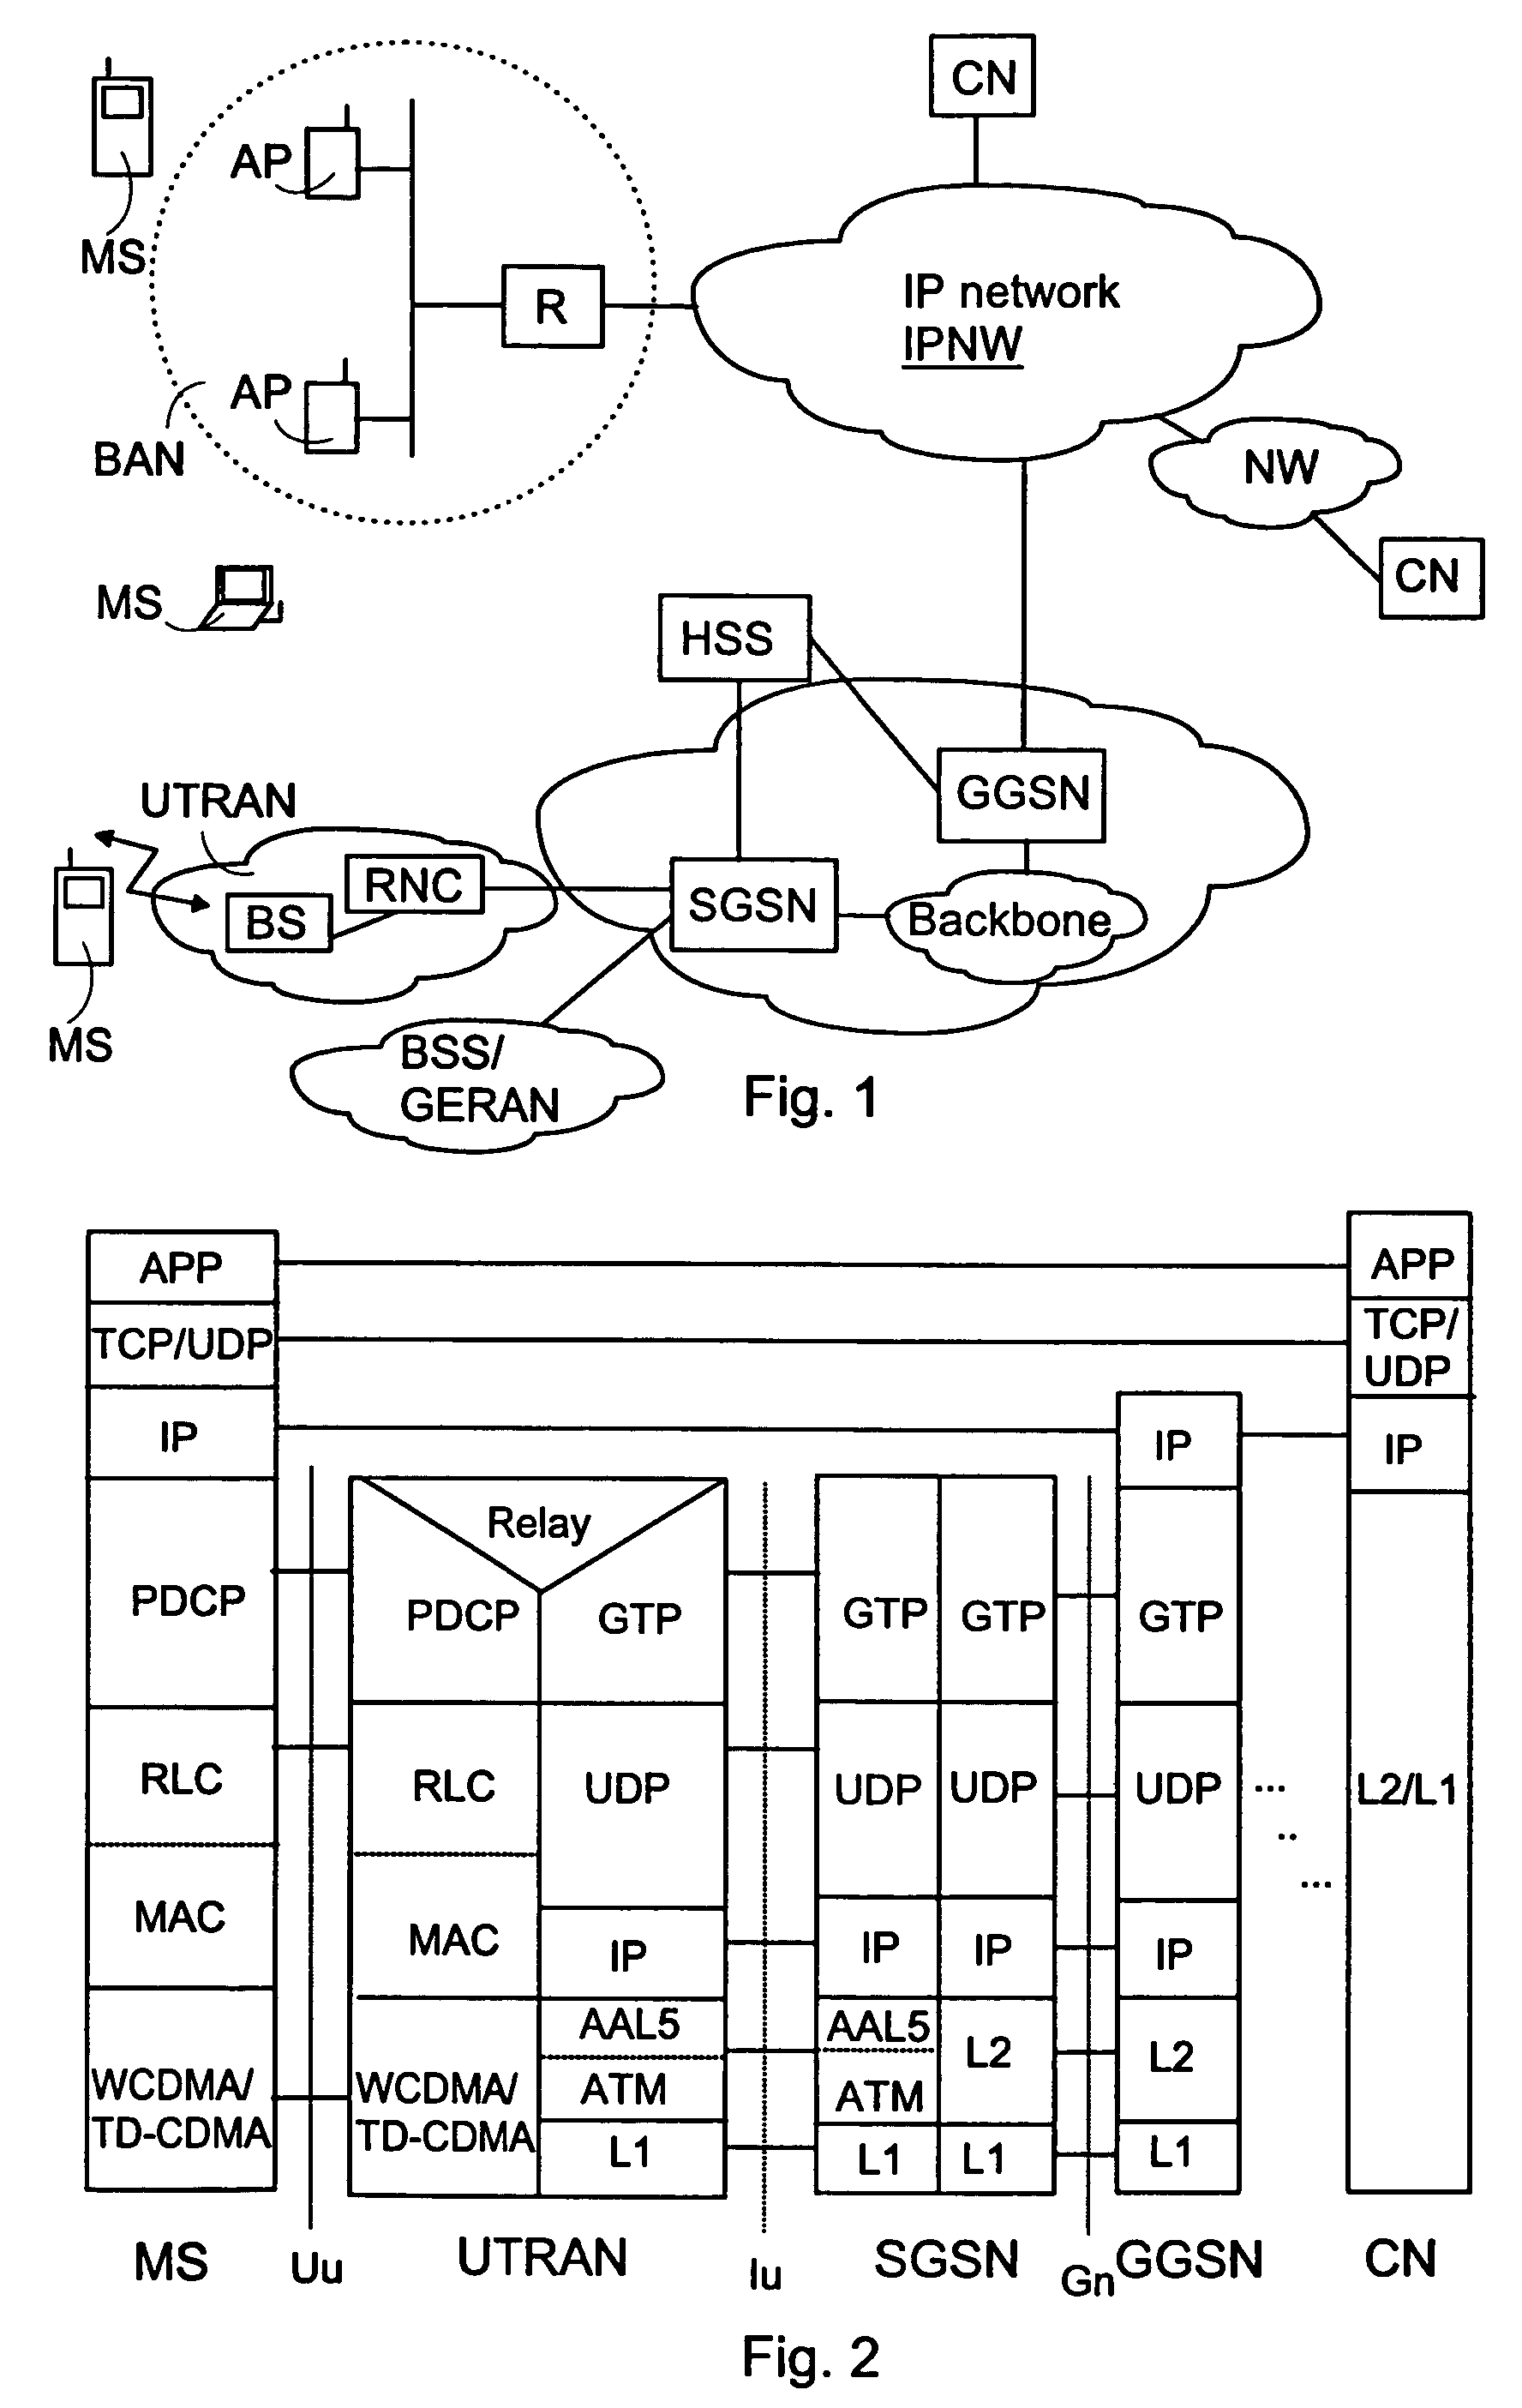 Method for informing changed communications capabilities